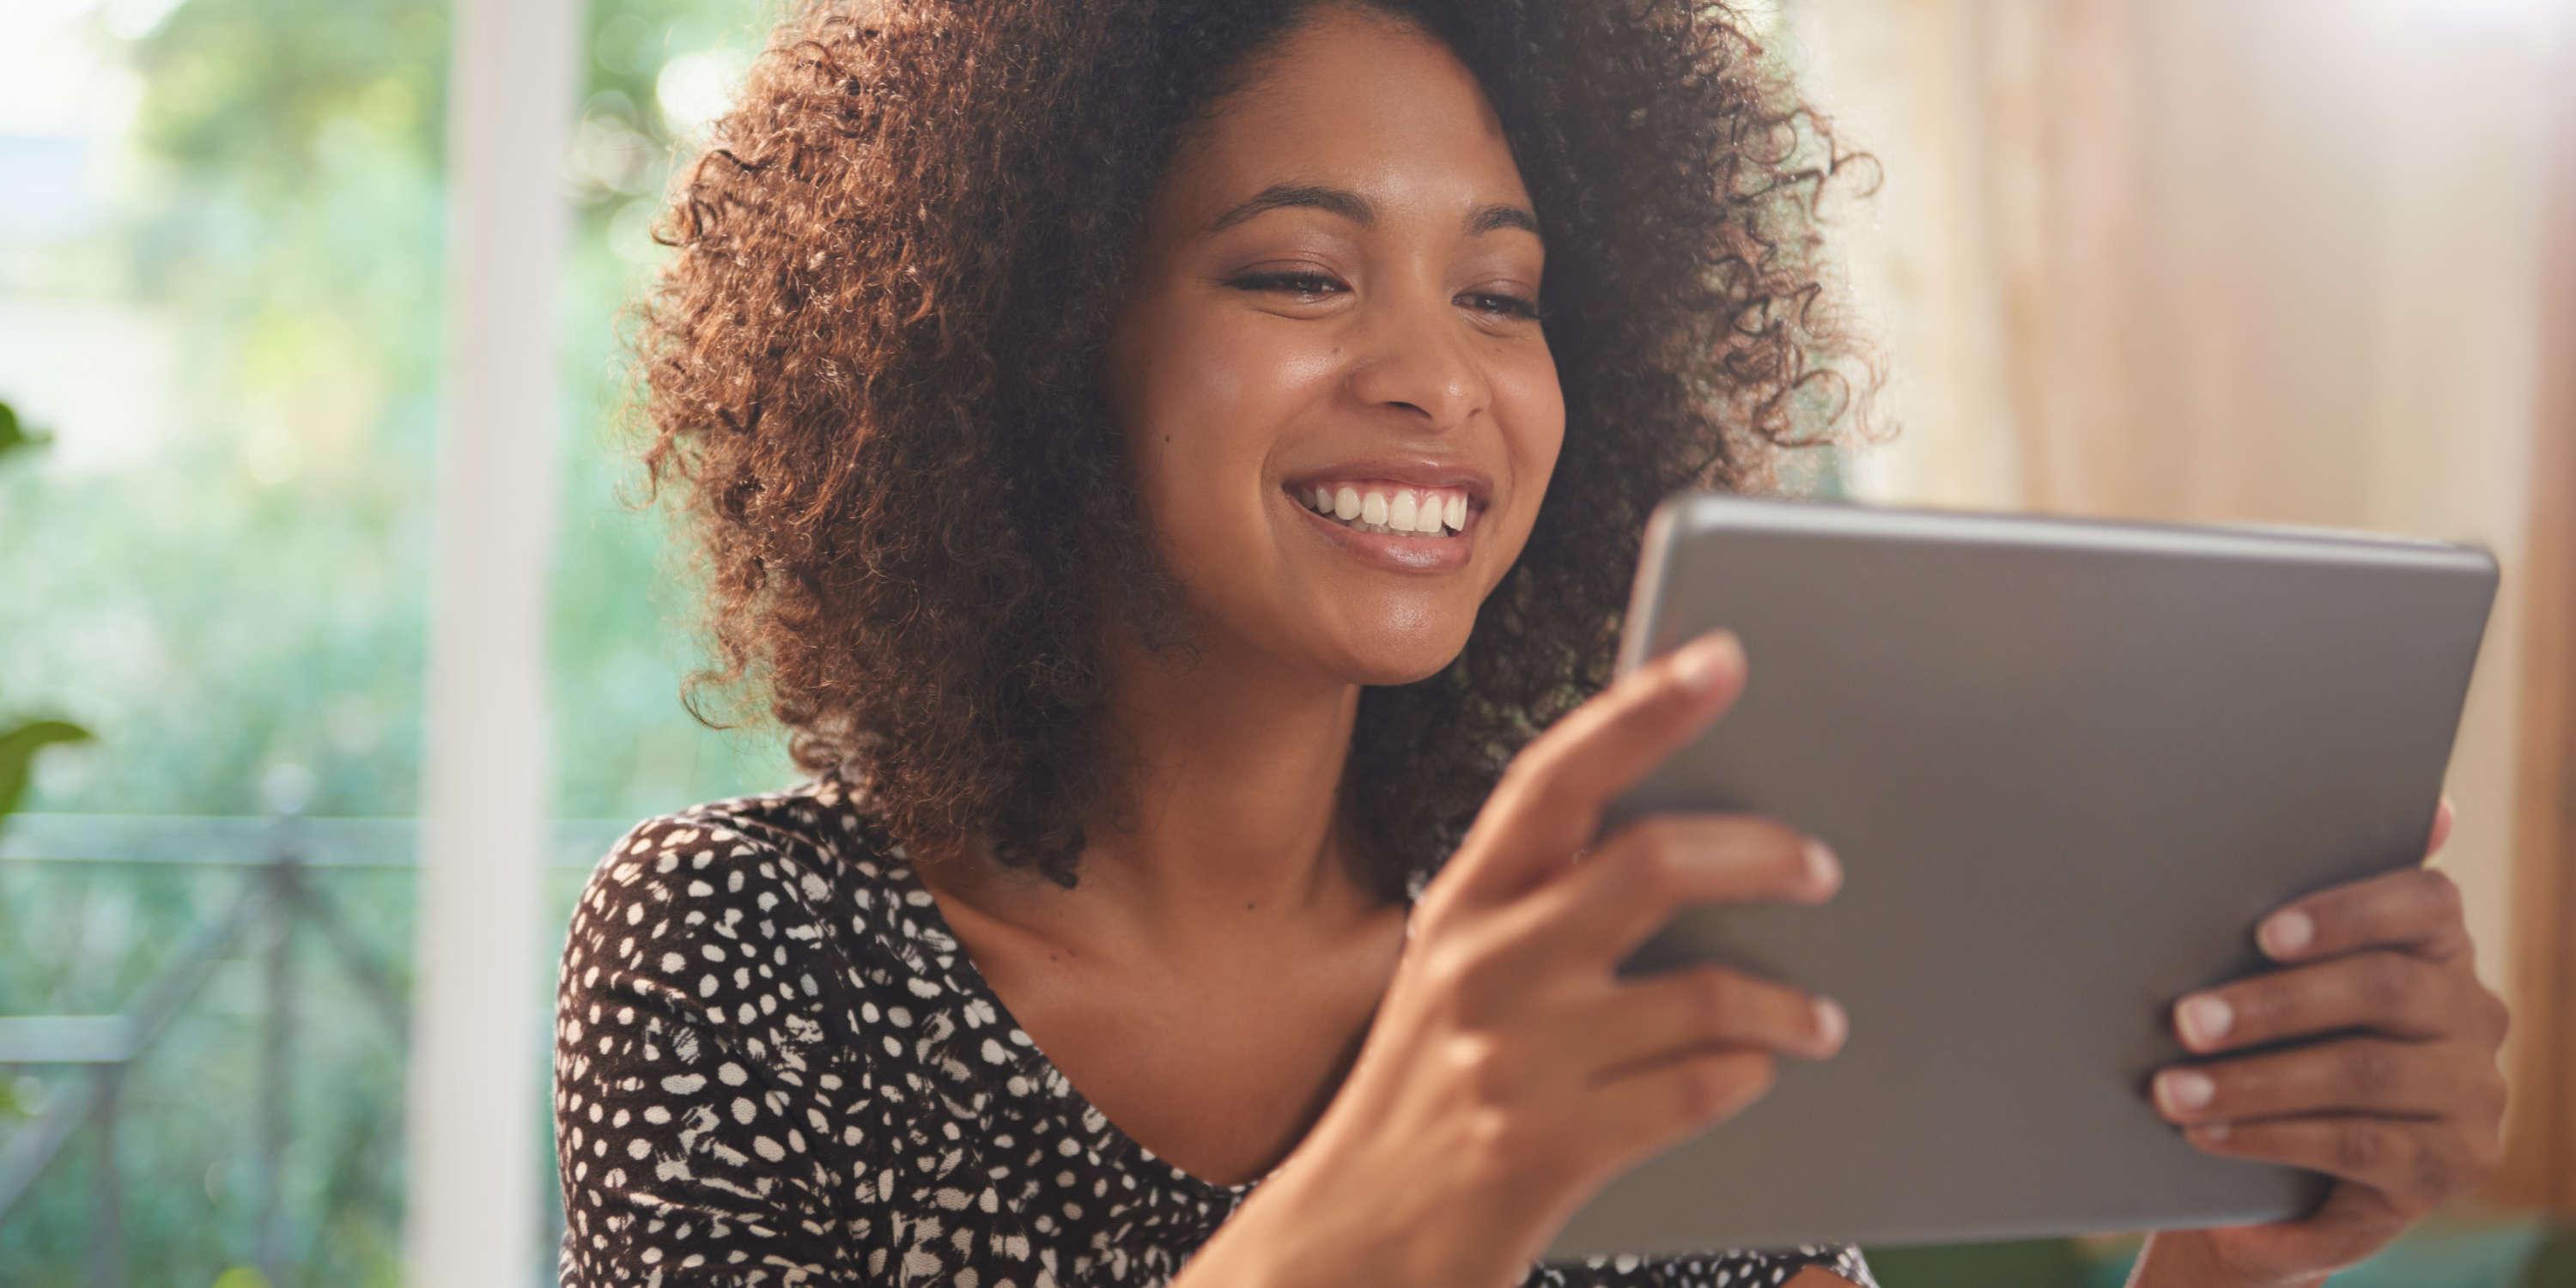 A black woman smiling while looking at a tablet.